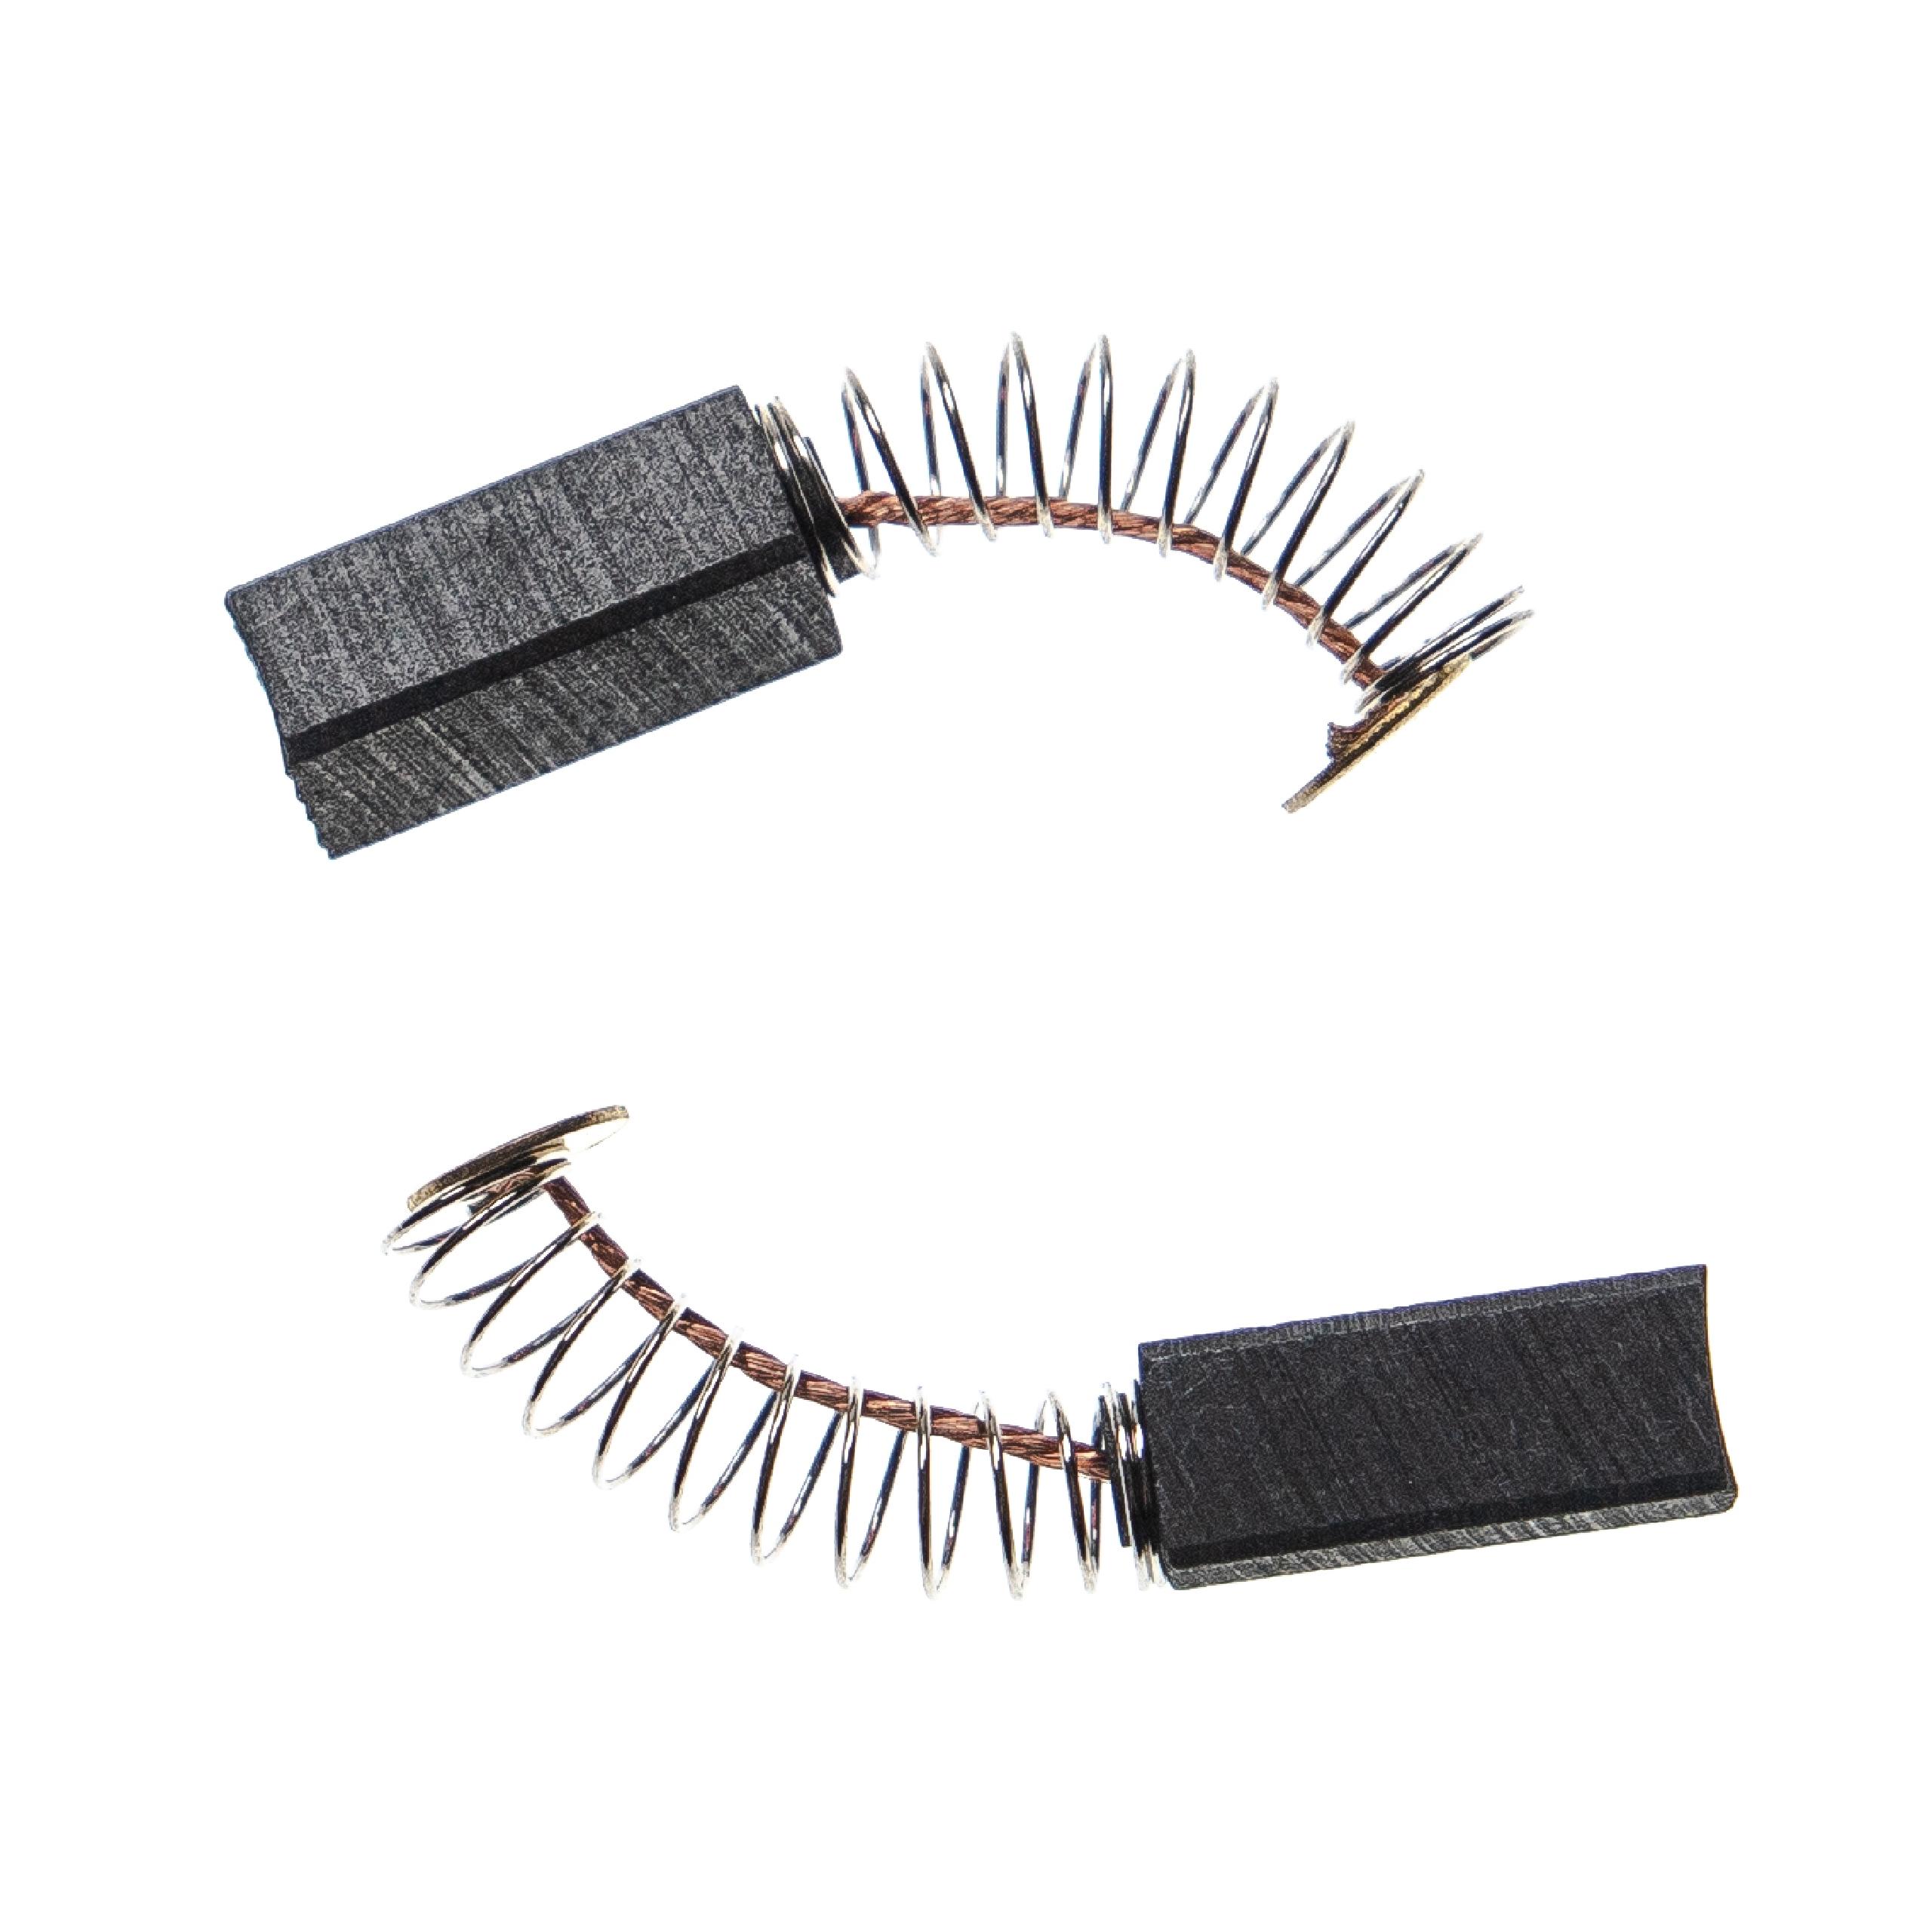 2x Carbon Brush as Replacement for Bosch 2604321904 Electric Power Tools, 16 x 6.3 x 6.3mm